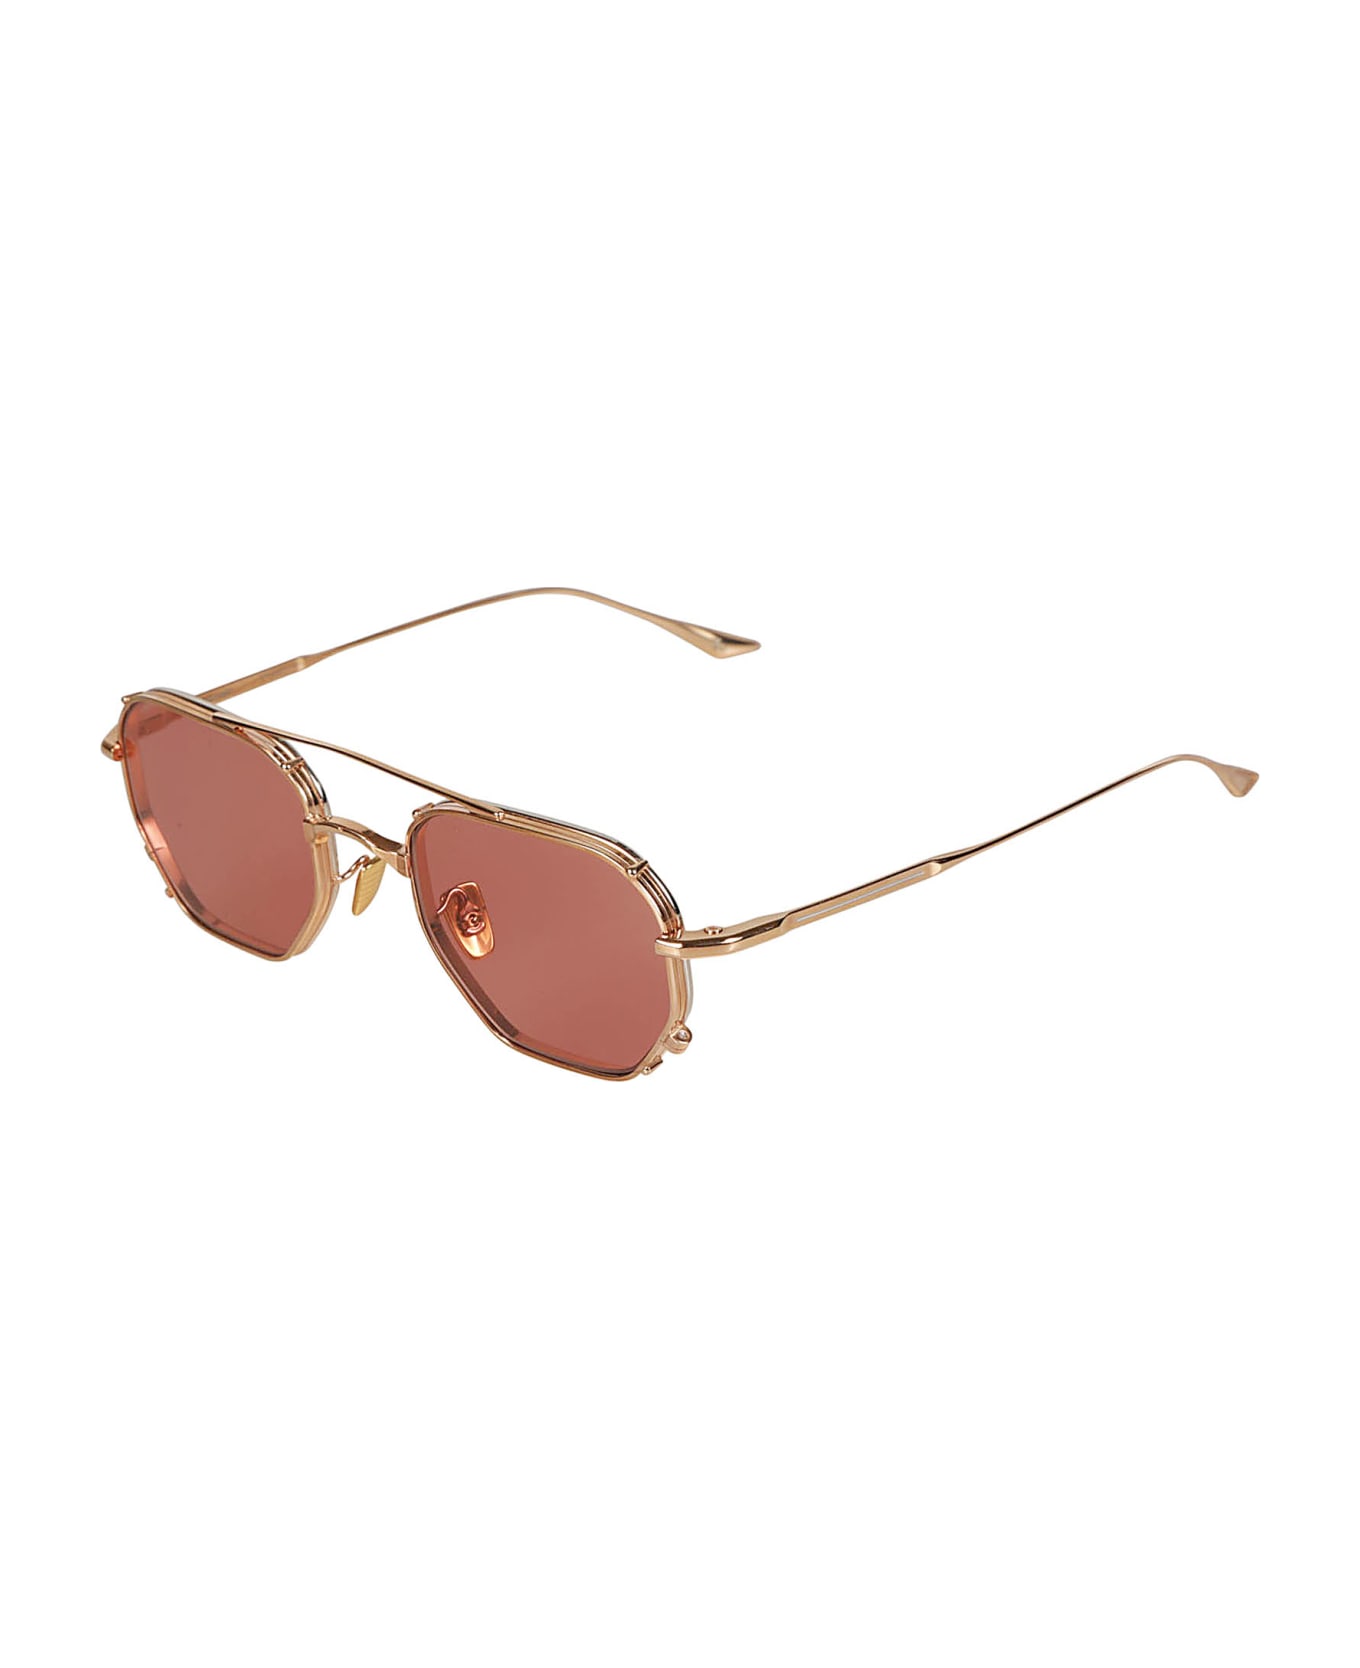 Jacques Marie Mage Marbot Sunglasses Sunglasses - Gold